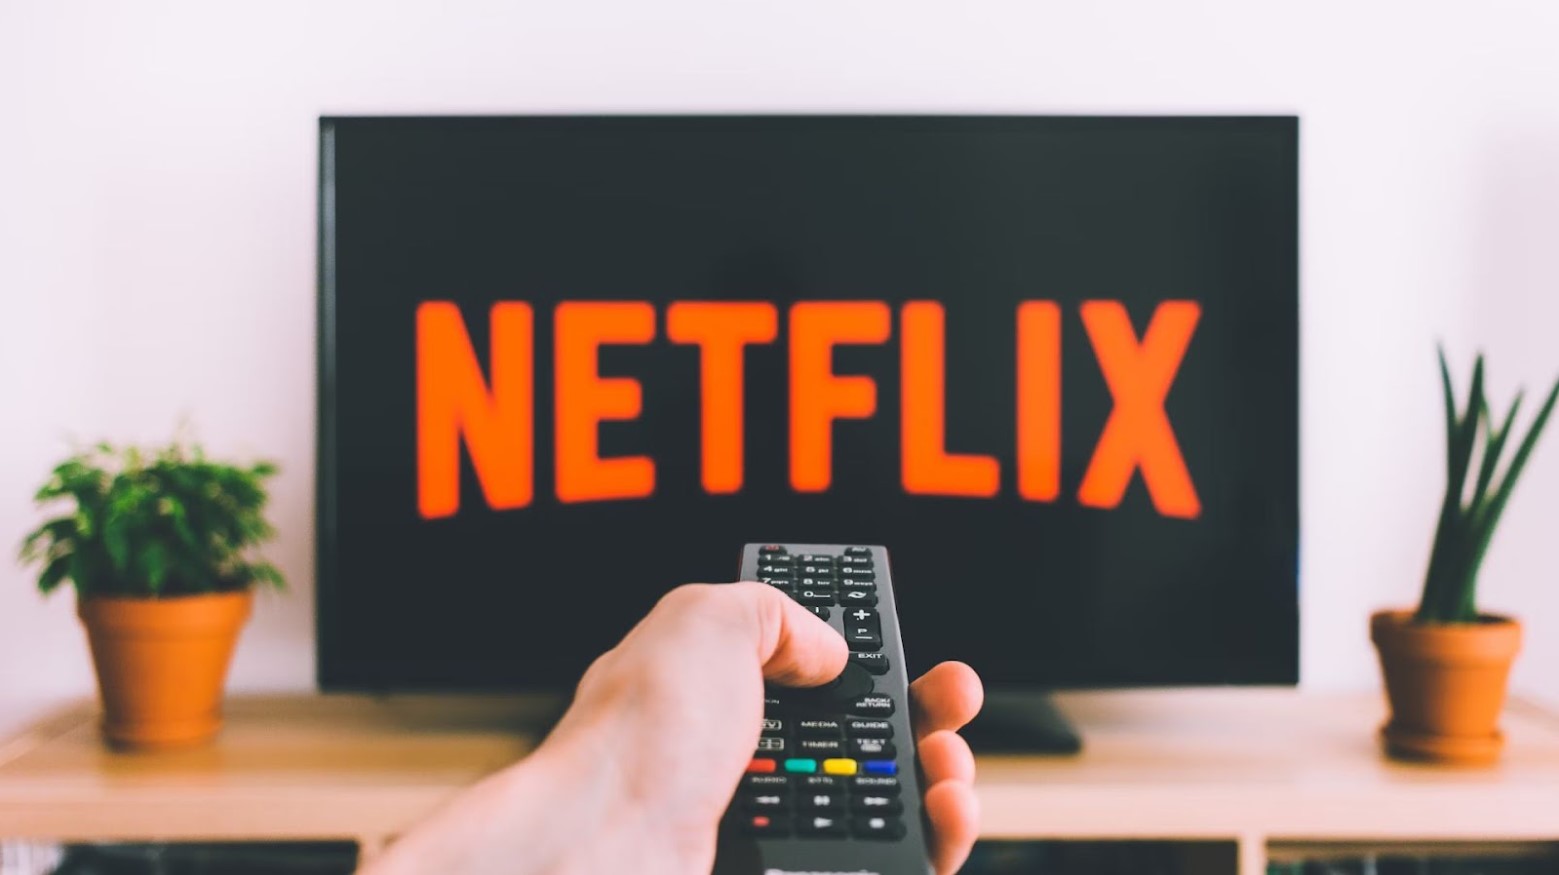 Netflix loading on a TV screen with a person holding a remote pointing at the TV. The TV is on a TV stand and has a plant on either side of it.